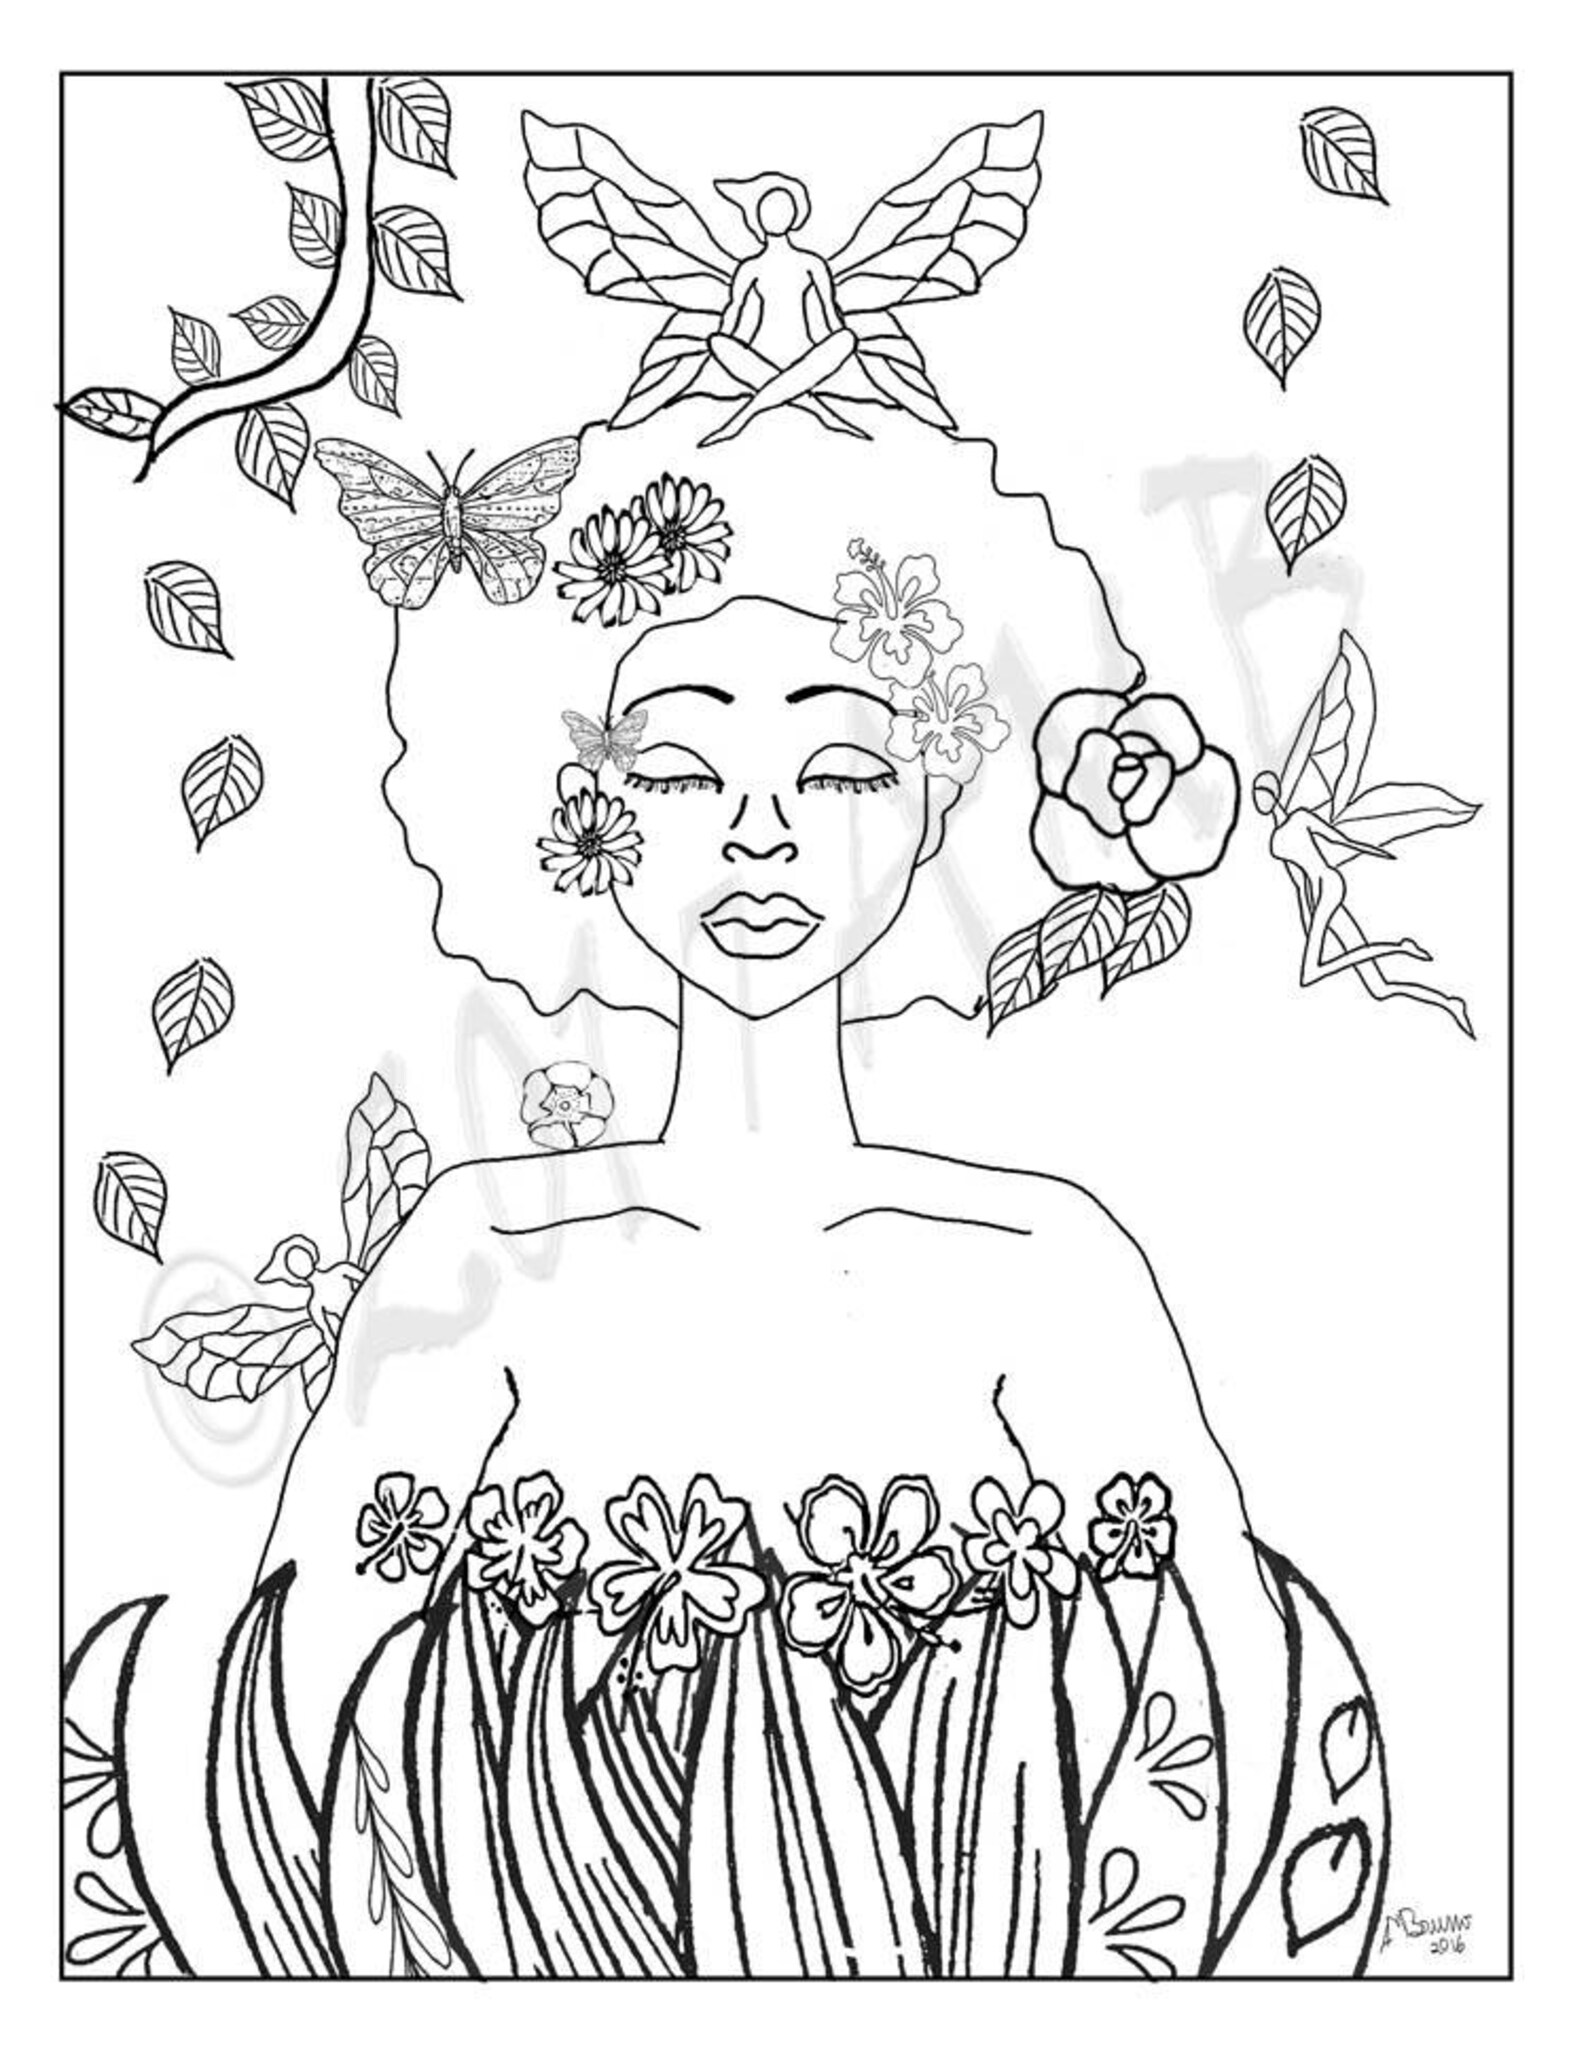 Faces Coloring Pages - Etsy